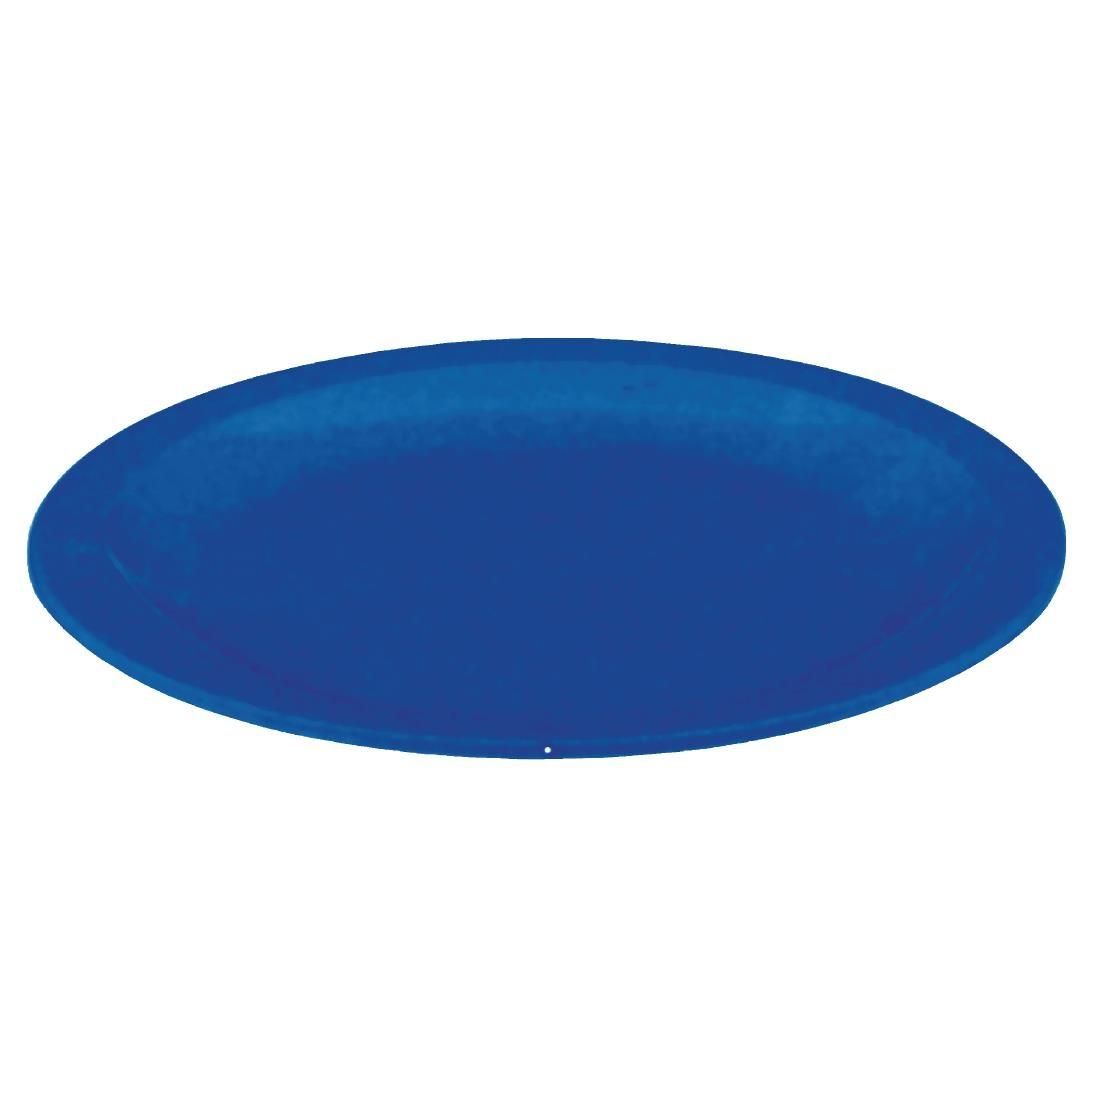 Olympia Kristallon Polycarbonate Plates Blue 230mm (Pack of 12) - CB769  - 1